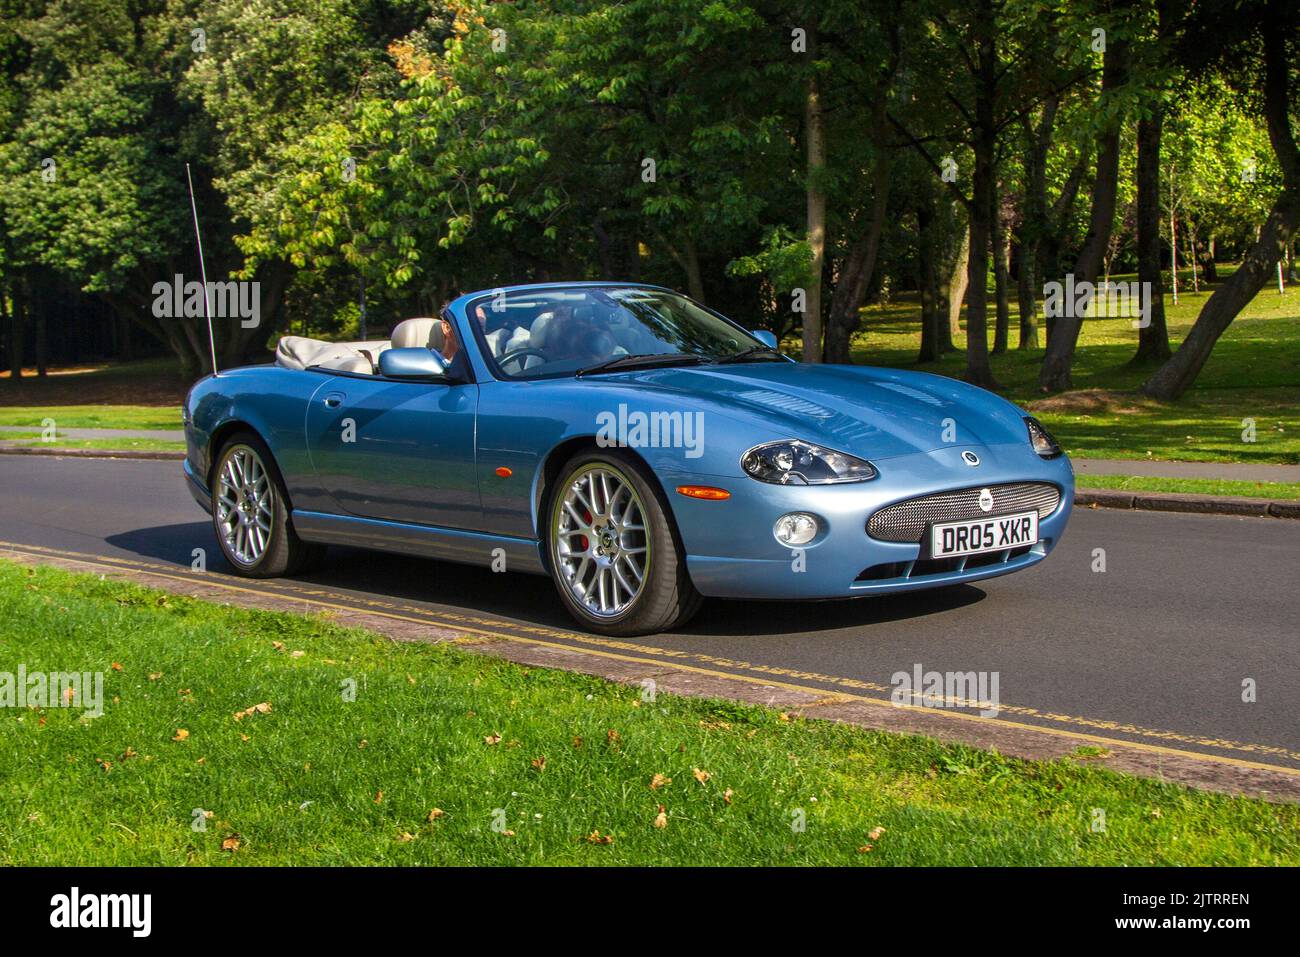 2005 Jaguar Xkr Convertible V8 S/C Auto arriving at the annual Stanley Park Classic Car Show. Stanley Park Classics Yesteryear Motor Show is hosted by Blackpool Vintage Vehicle Preservation Group, UK. Stock Photo